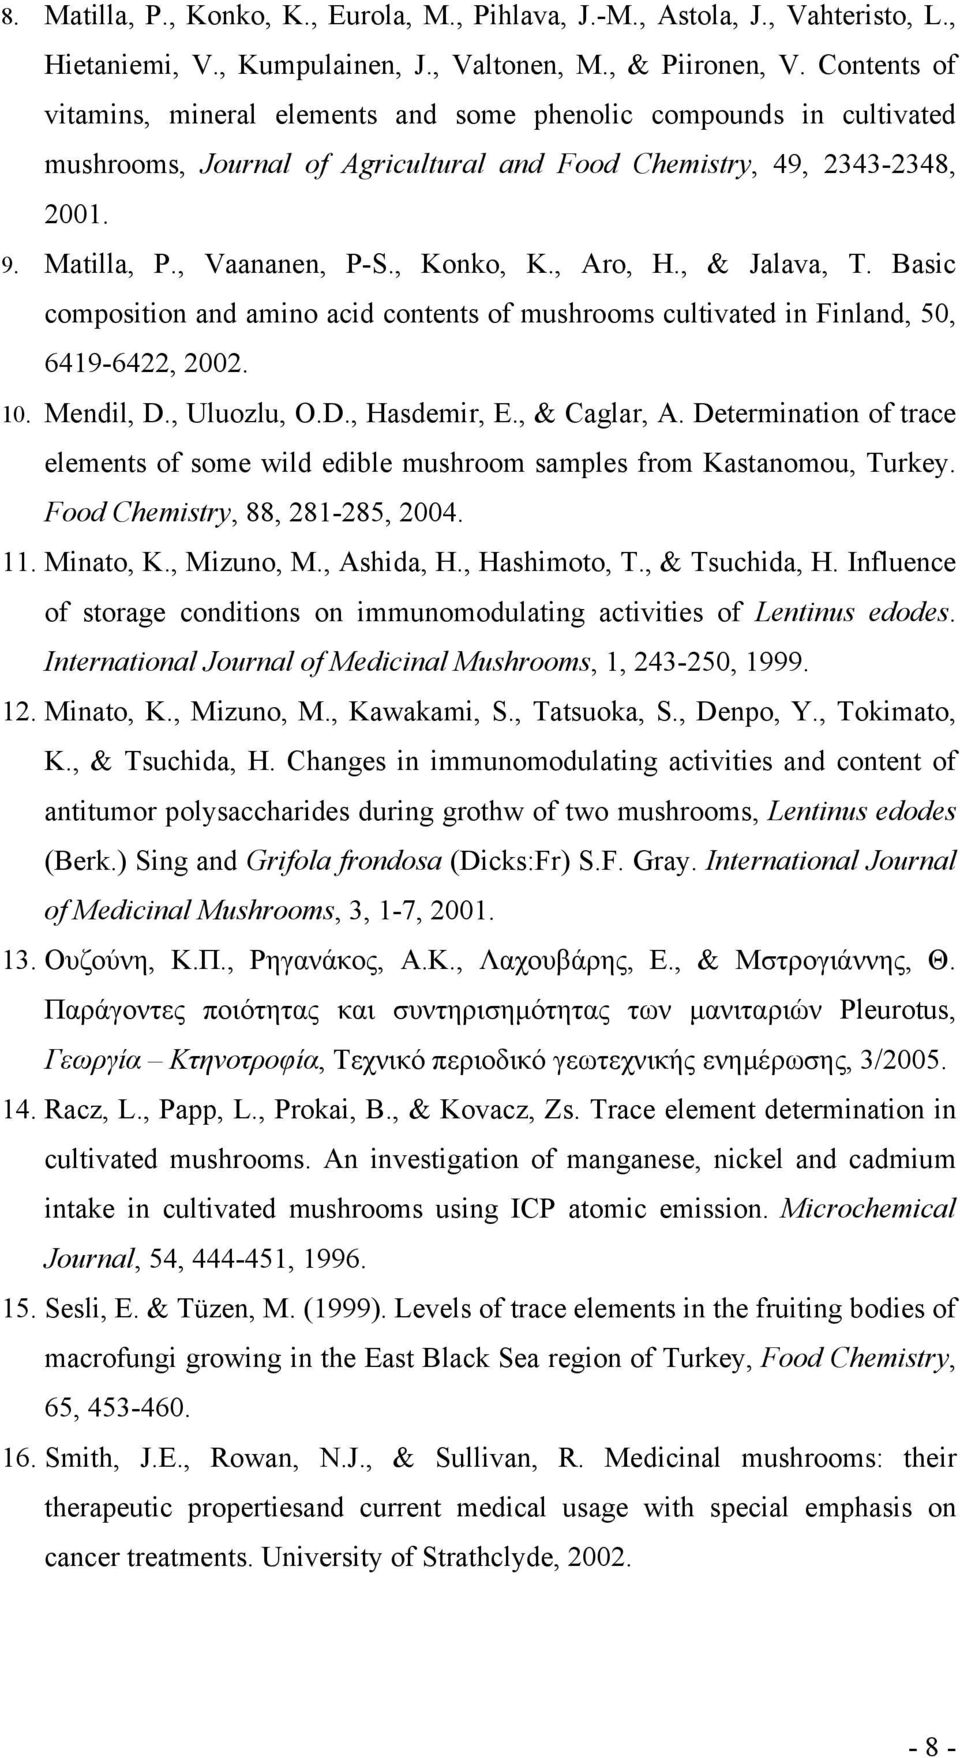 , Aro, H., & Jalava, T. Basic composition and amino acid contents of mushrooms cultivated in Finland, 50, 6419-6422, 2002. 10. Mendil, D., Uluozlu, O.D., Hasdemir, E., & Caglar, A.